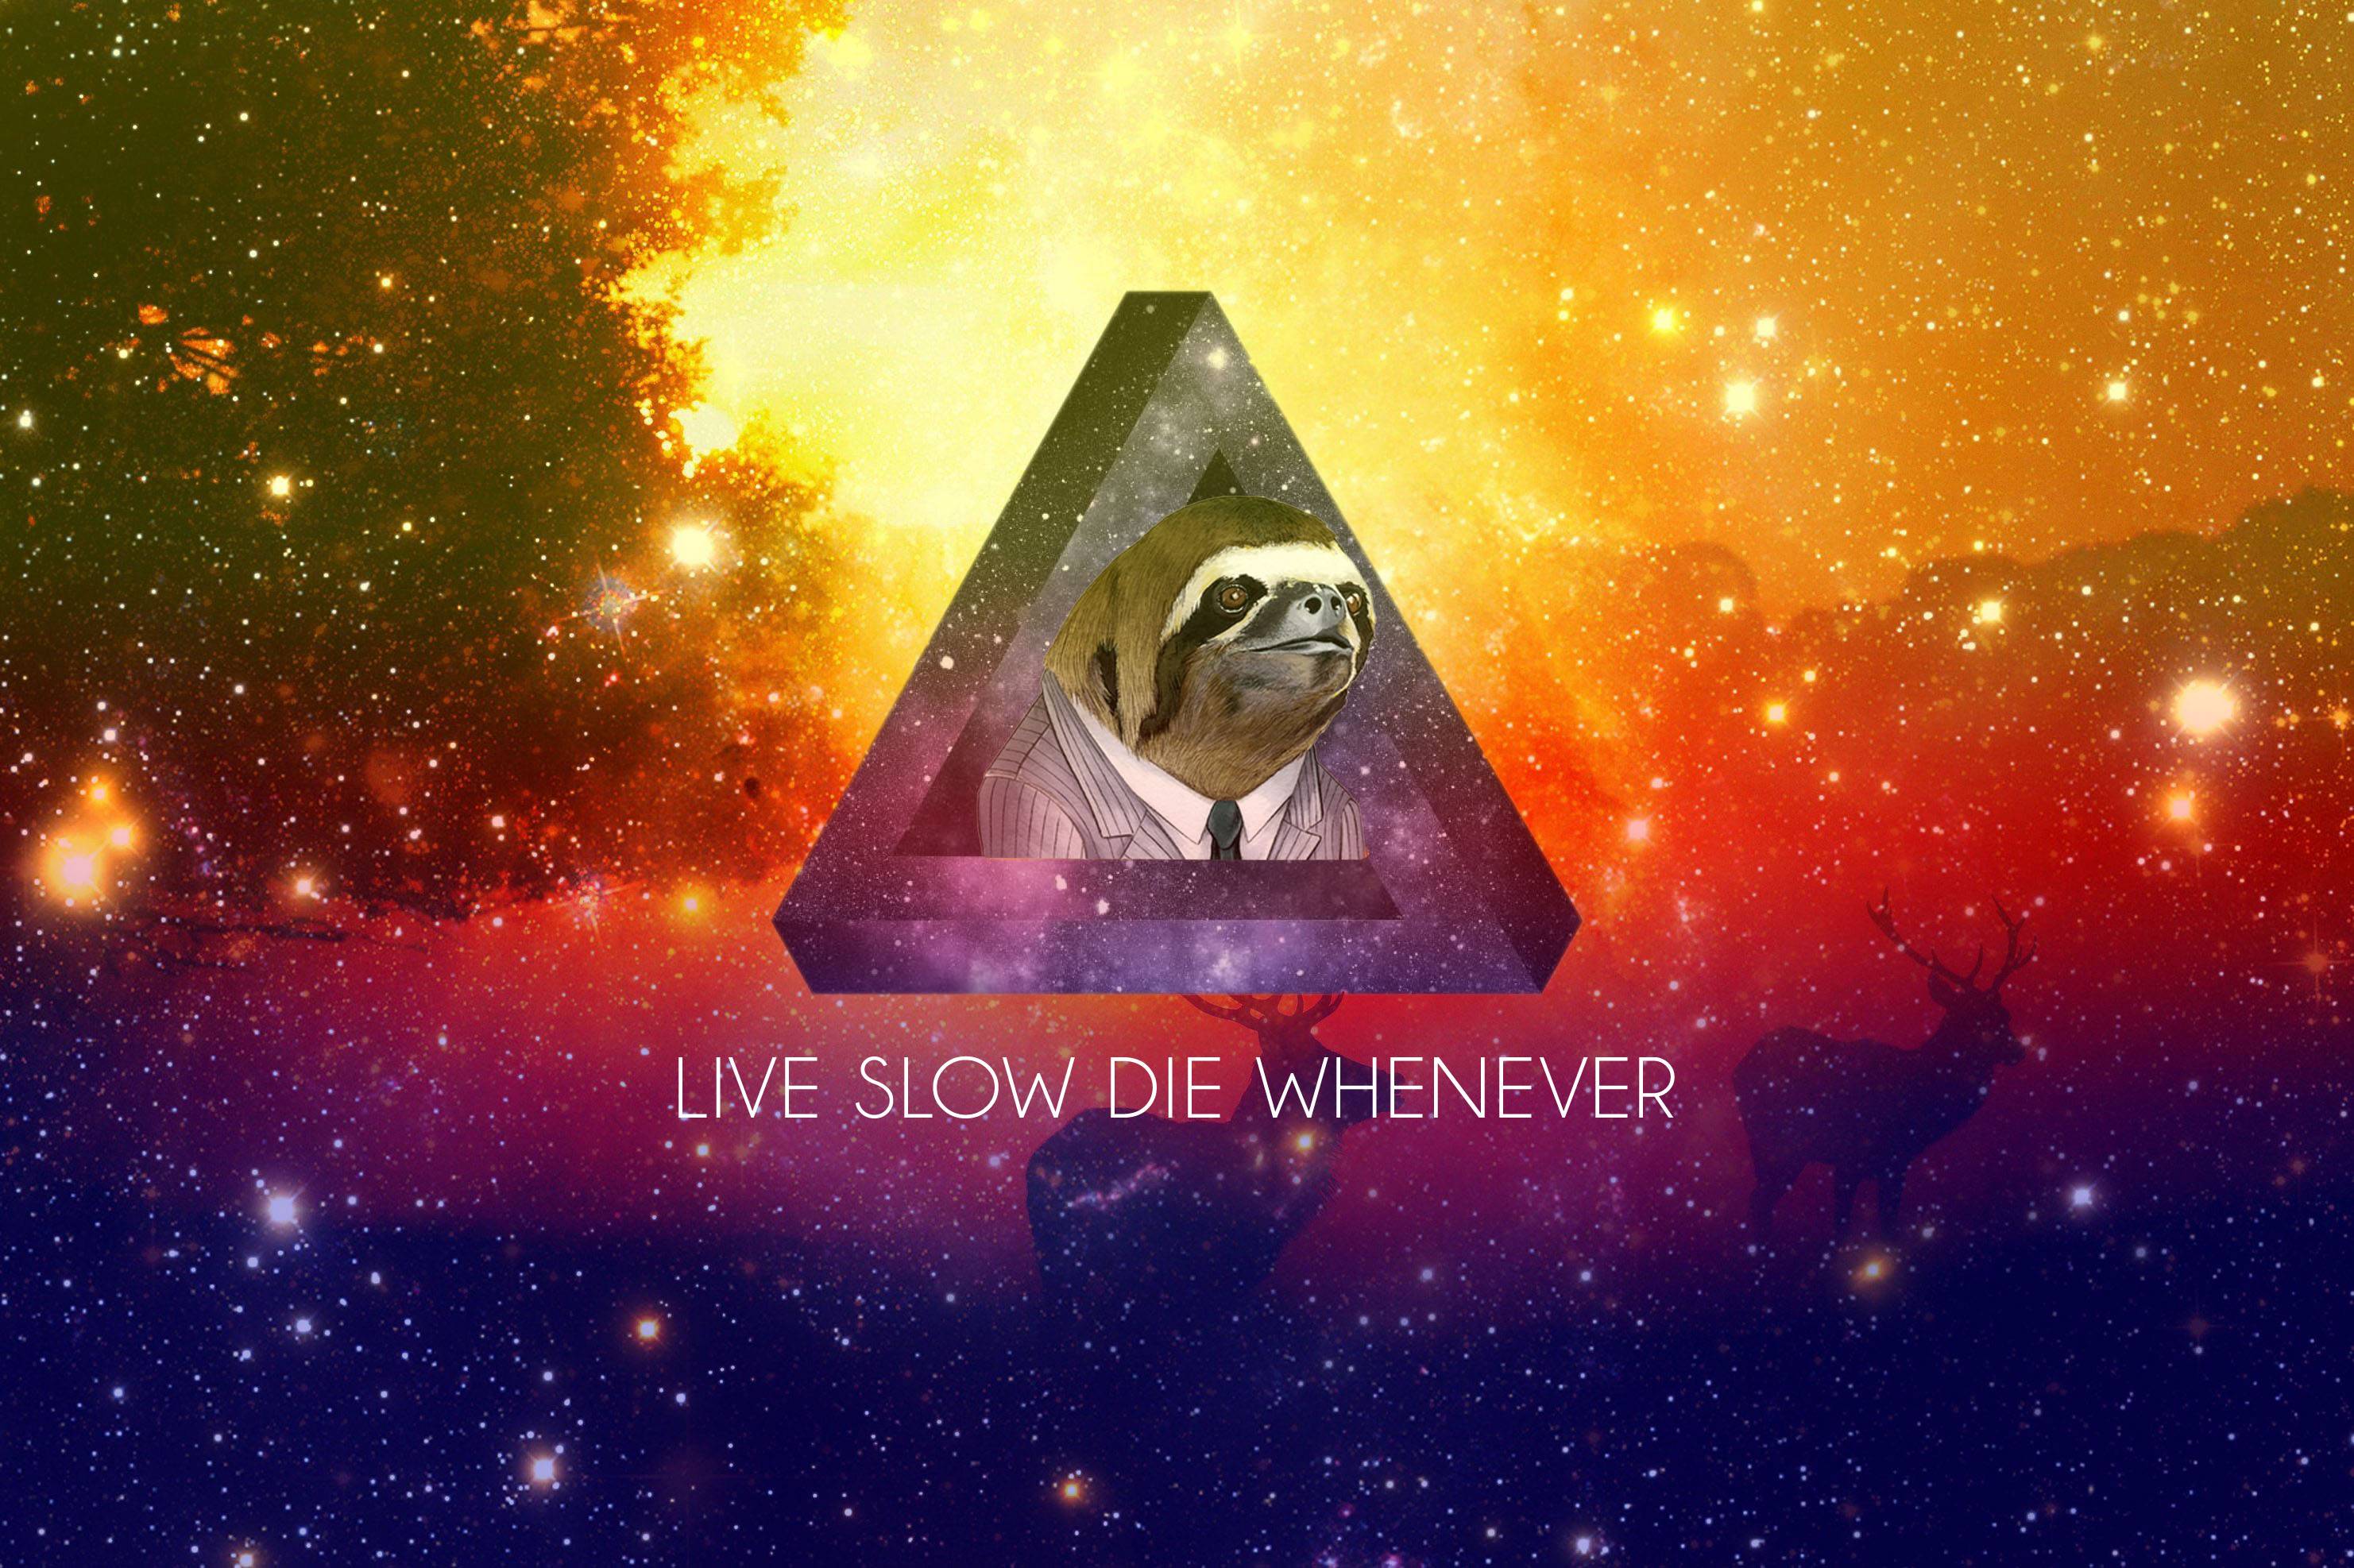 Another sloth wallpaper, Live Slow Die Whenever